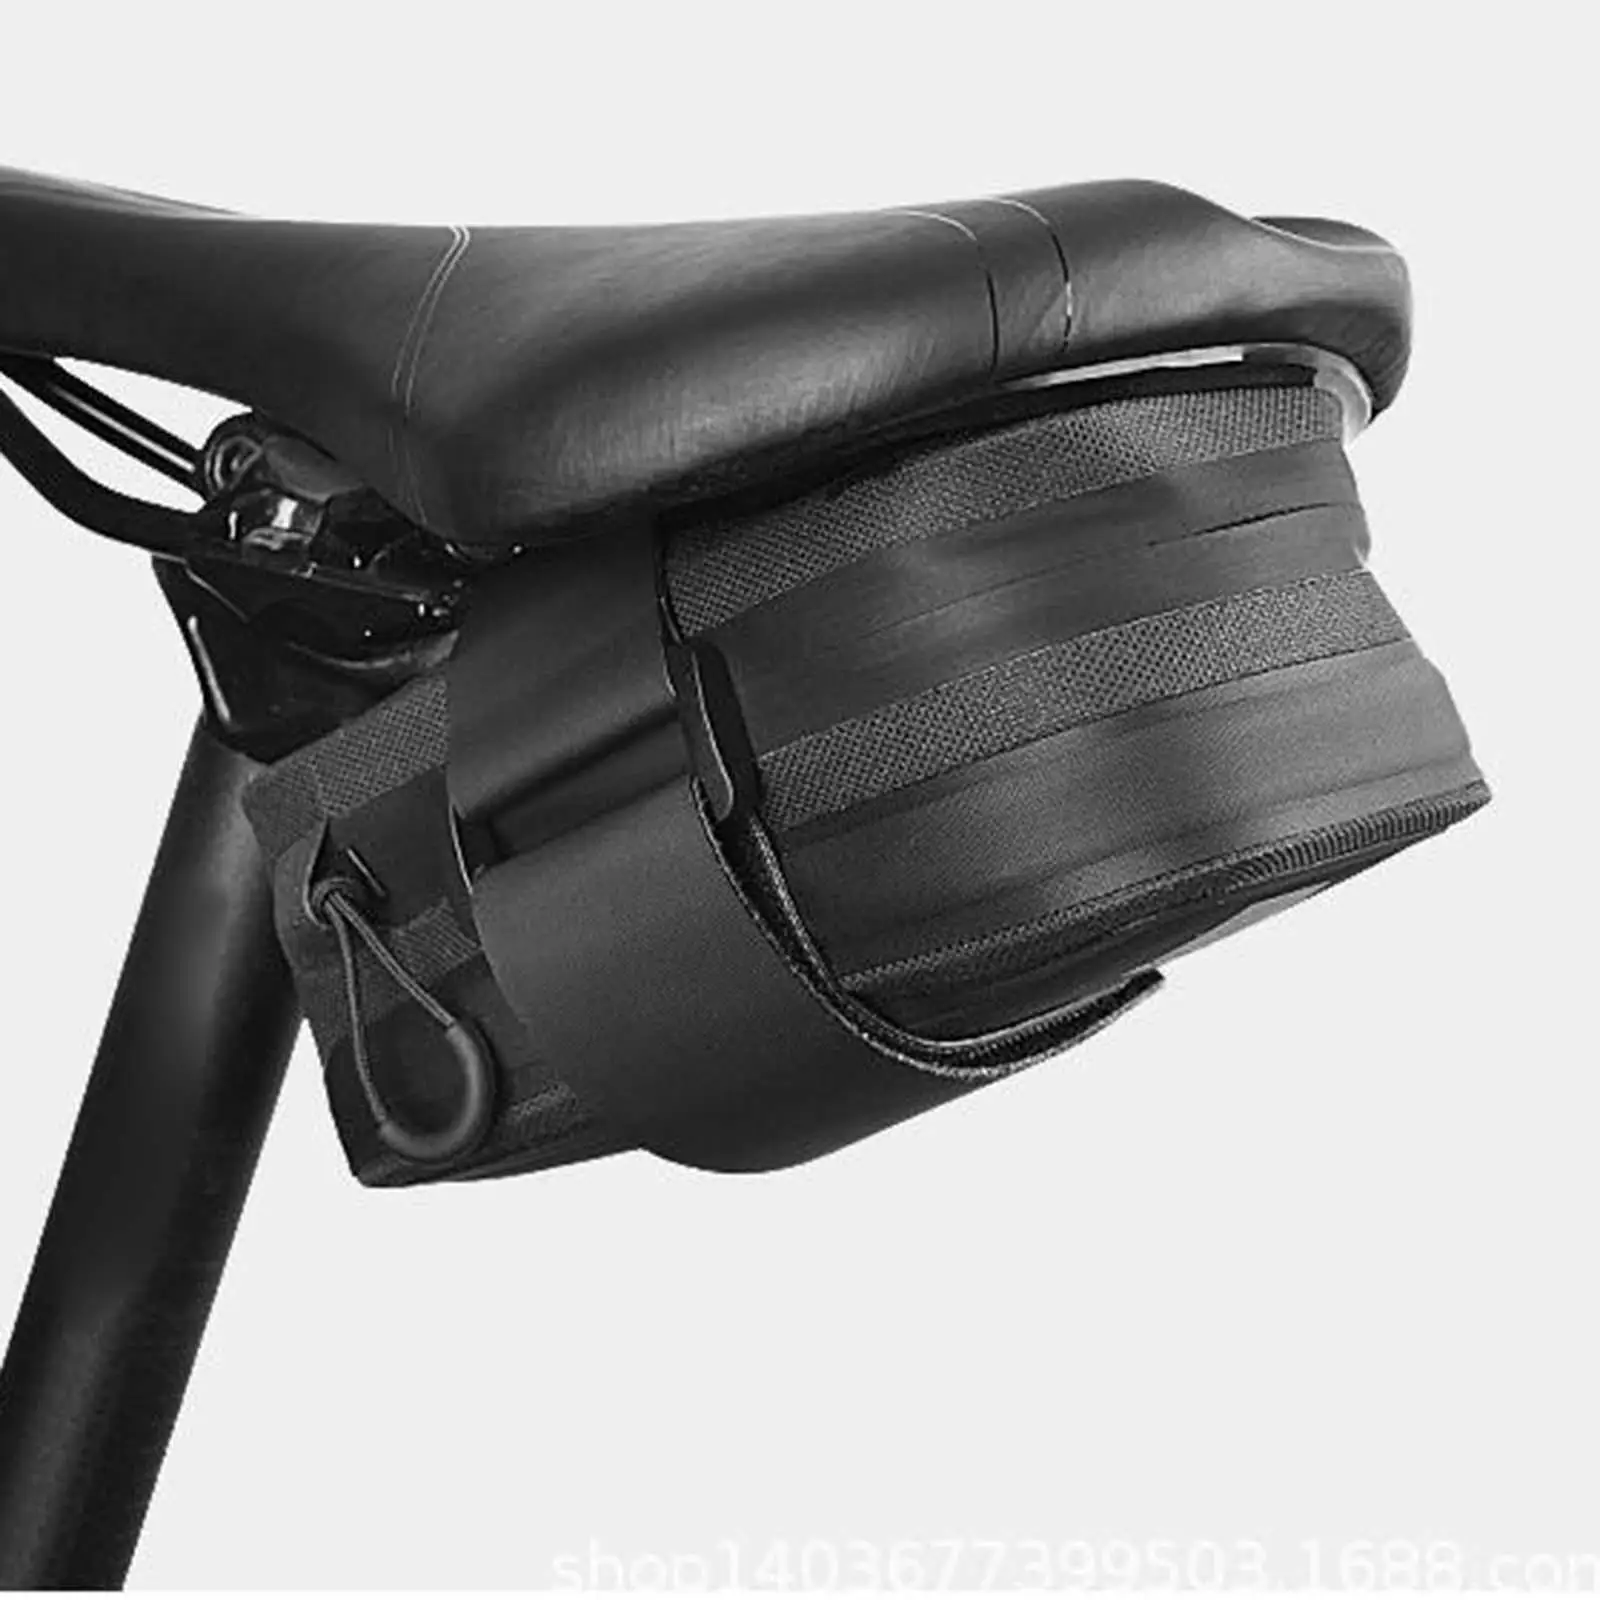 Rear Seat  Durable Waterproof Storage Pouch Compatible for Cycling